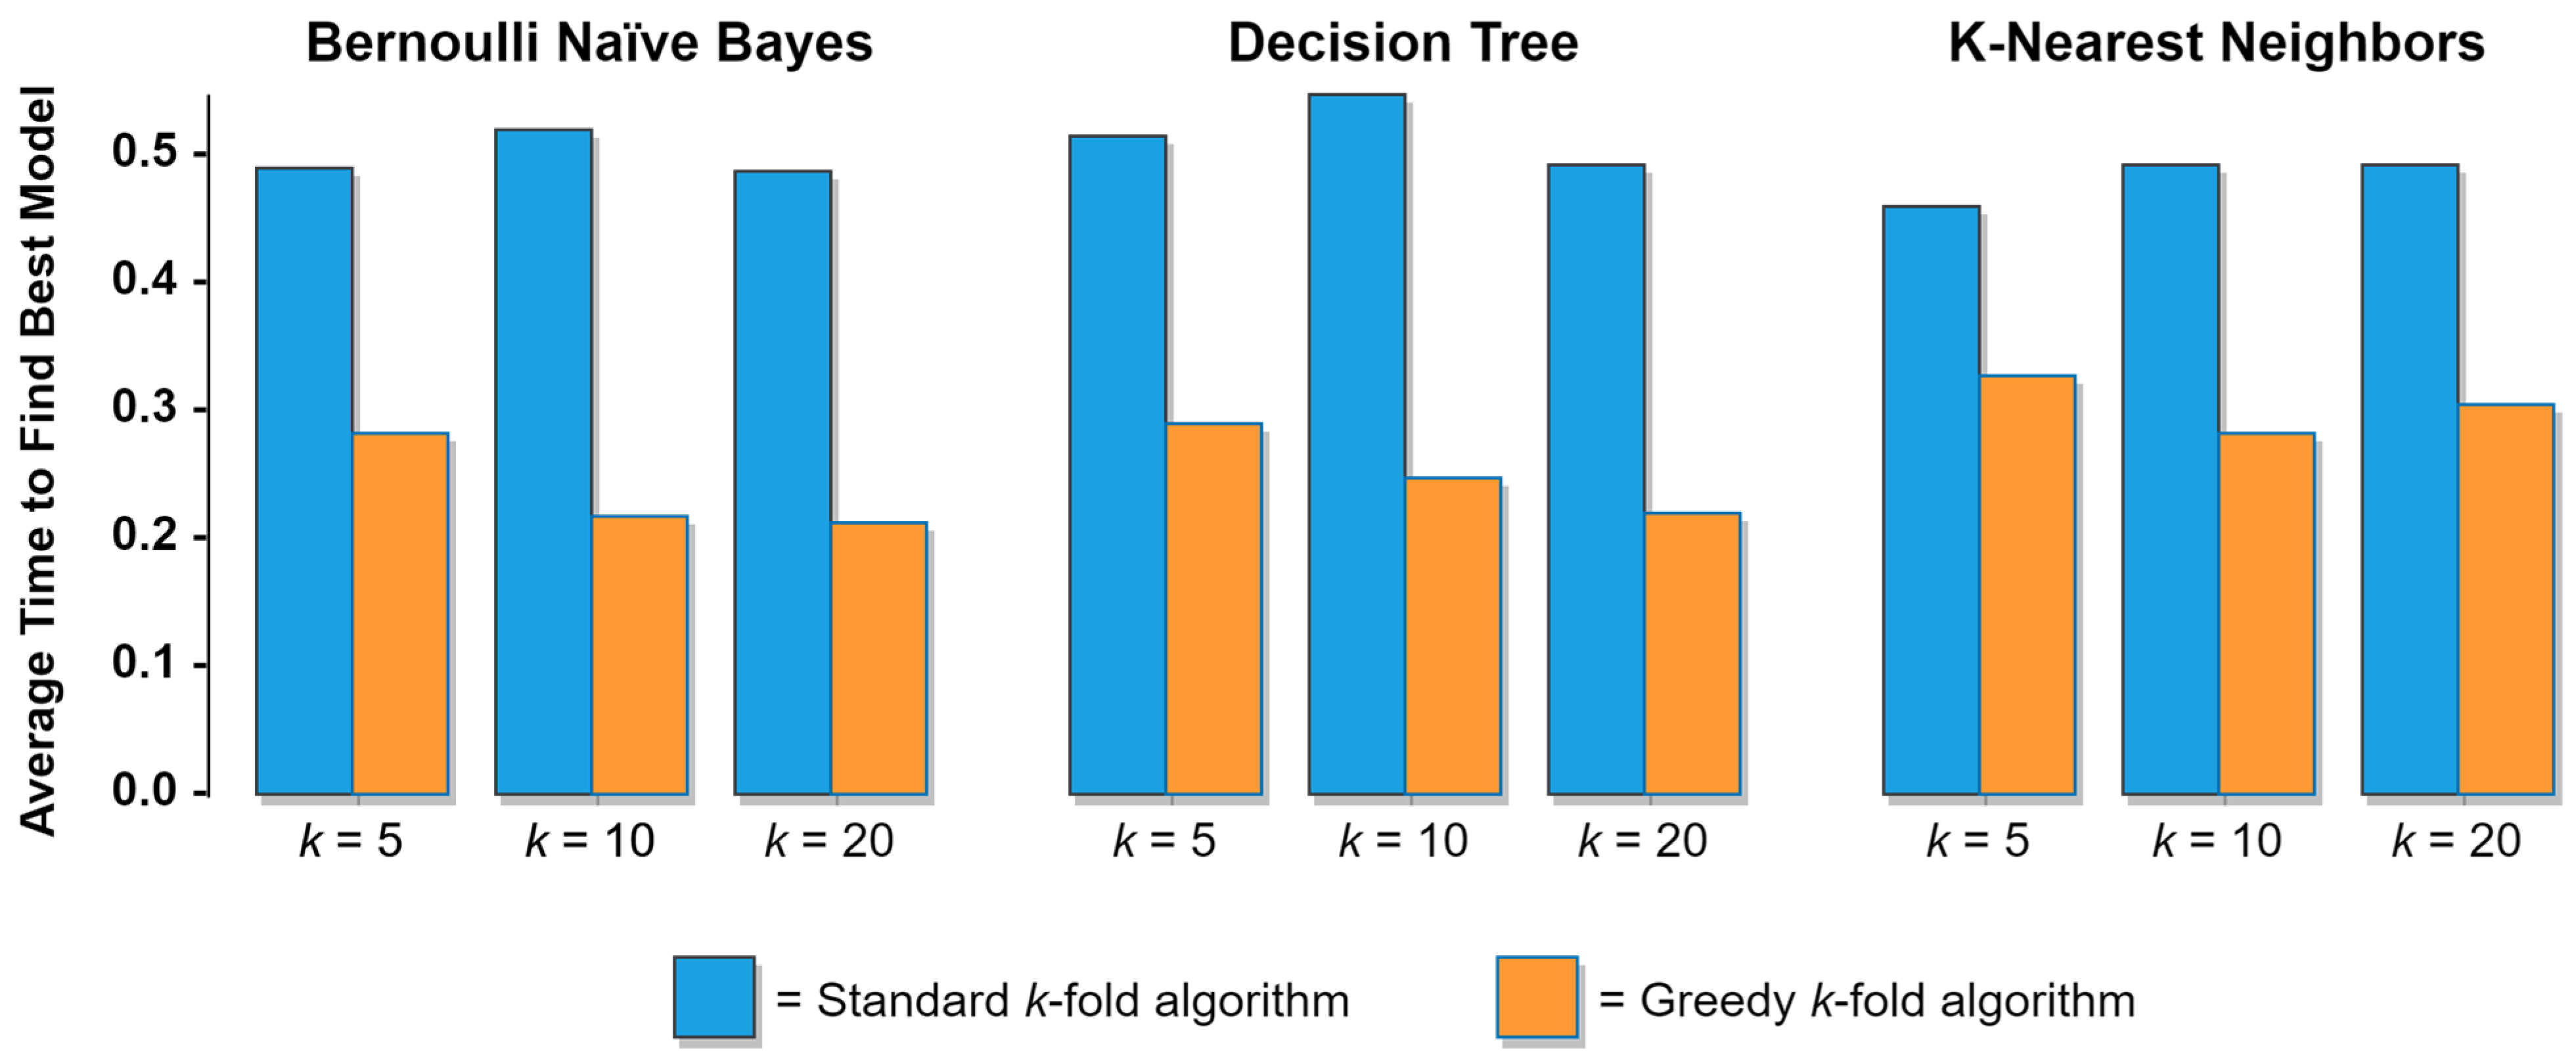 Am I Greedy? Test Your Greed With Scientifically Validated Greed